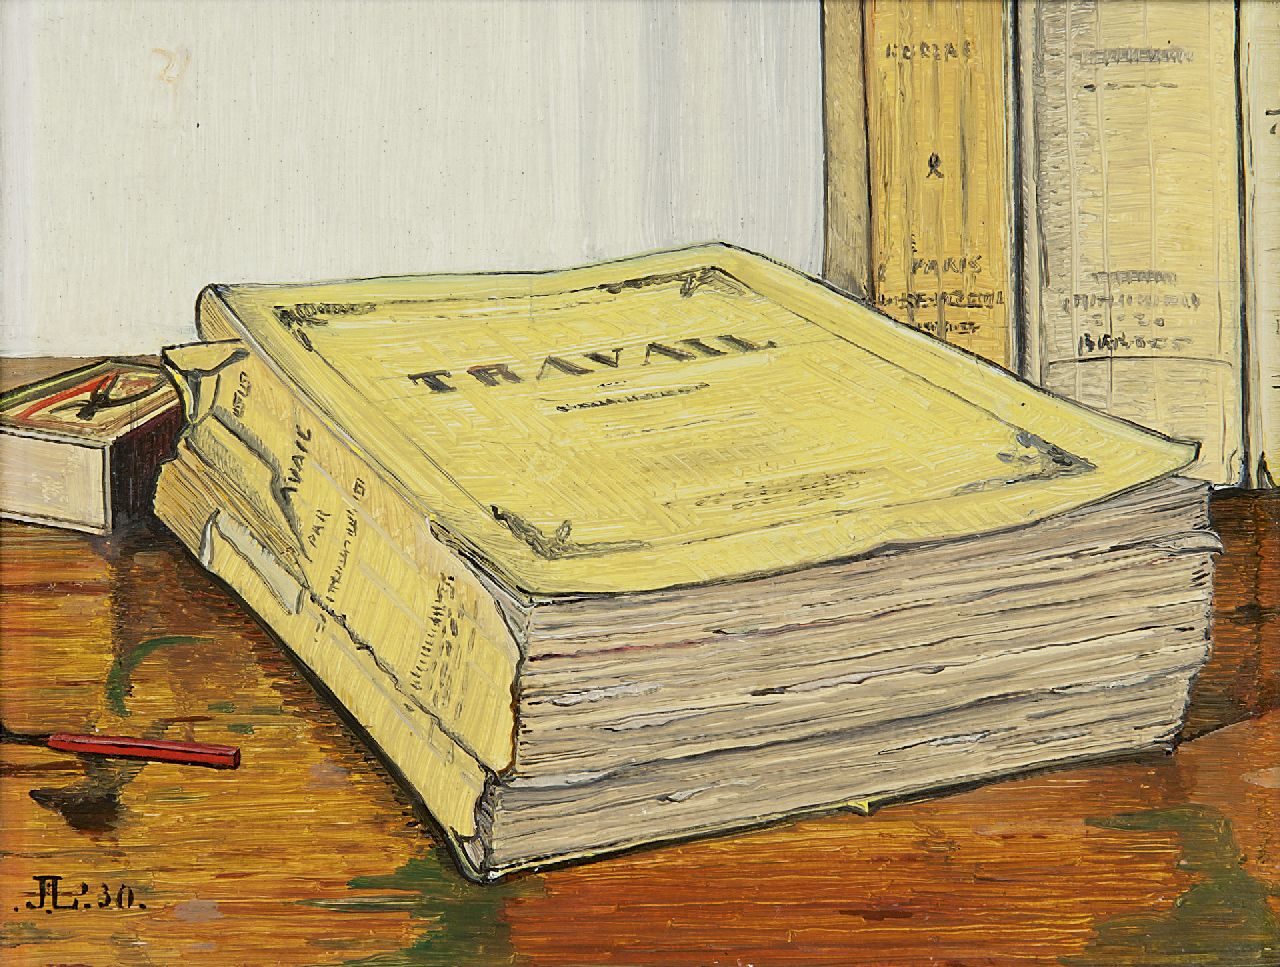 Lodeizen J.  | Johannes 'Jo' Lodeizen, A still life with the book 'Travail' by Emile Zola, oil on panel 16.1 x 21.1 cm, signed l.l. with monogram and dated ' 30